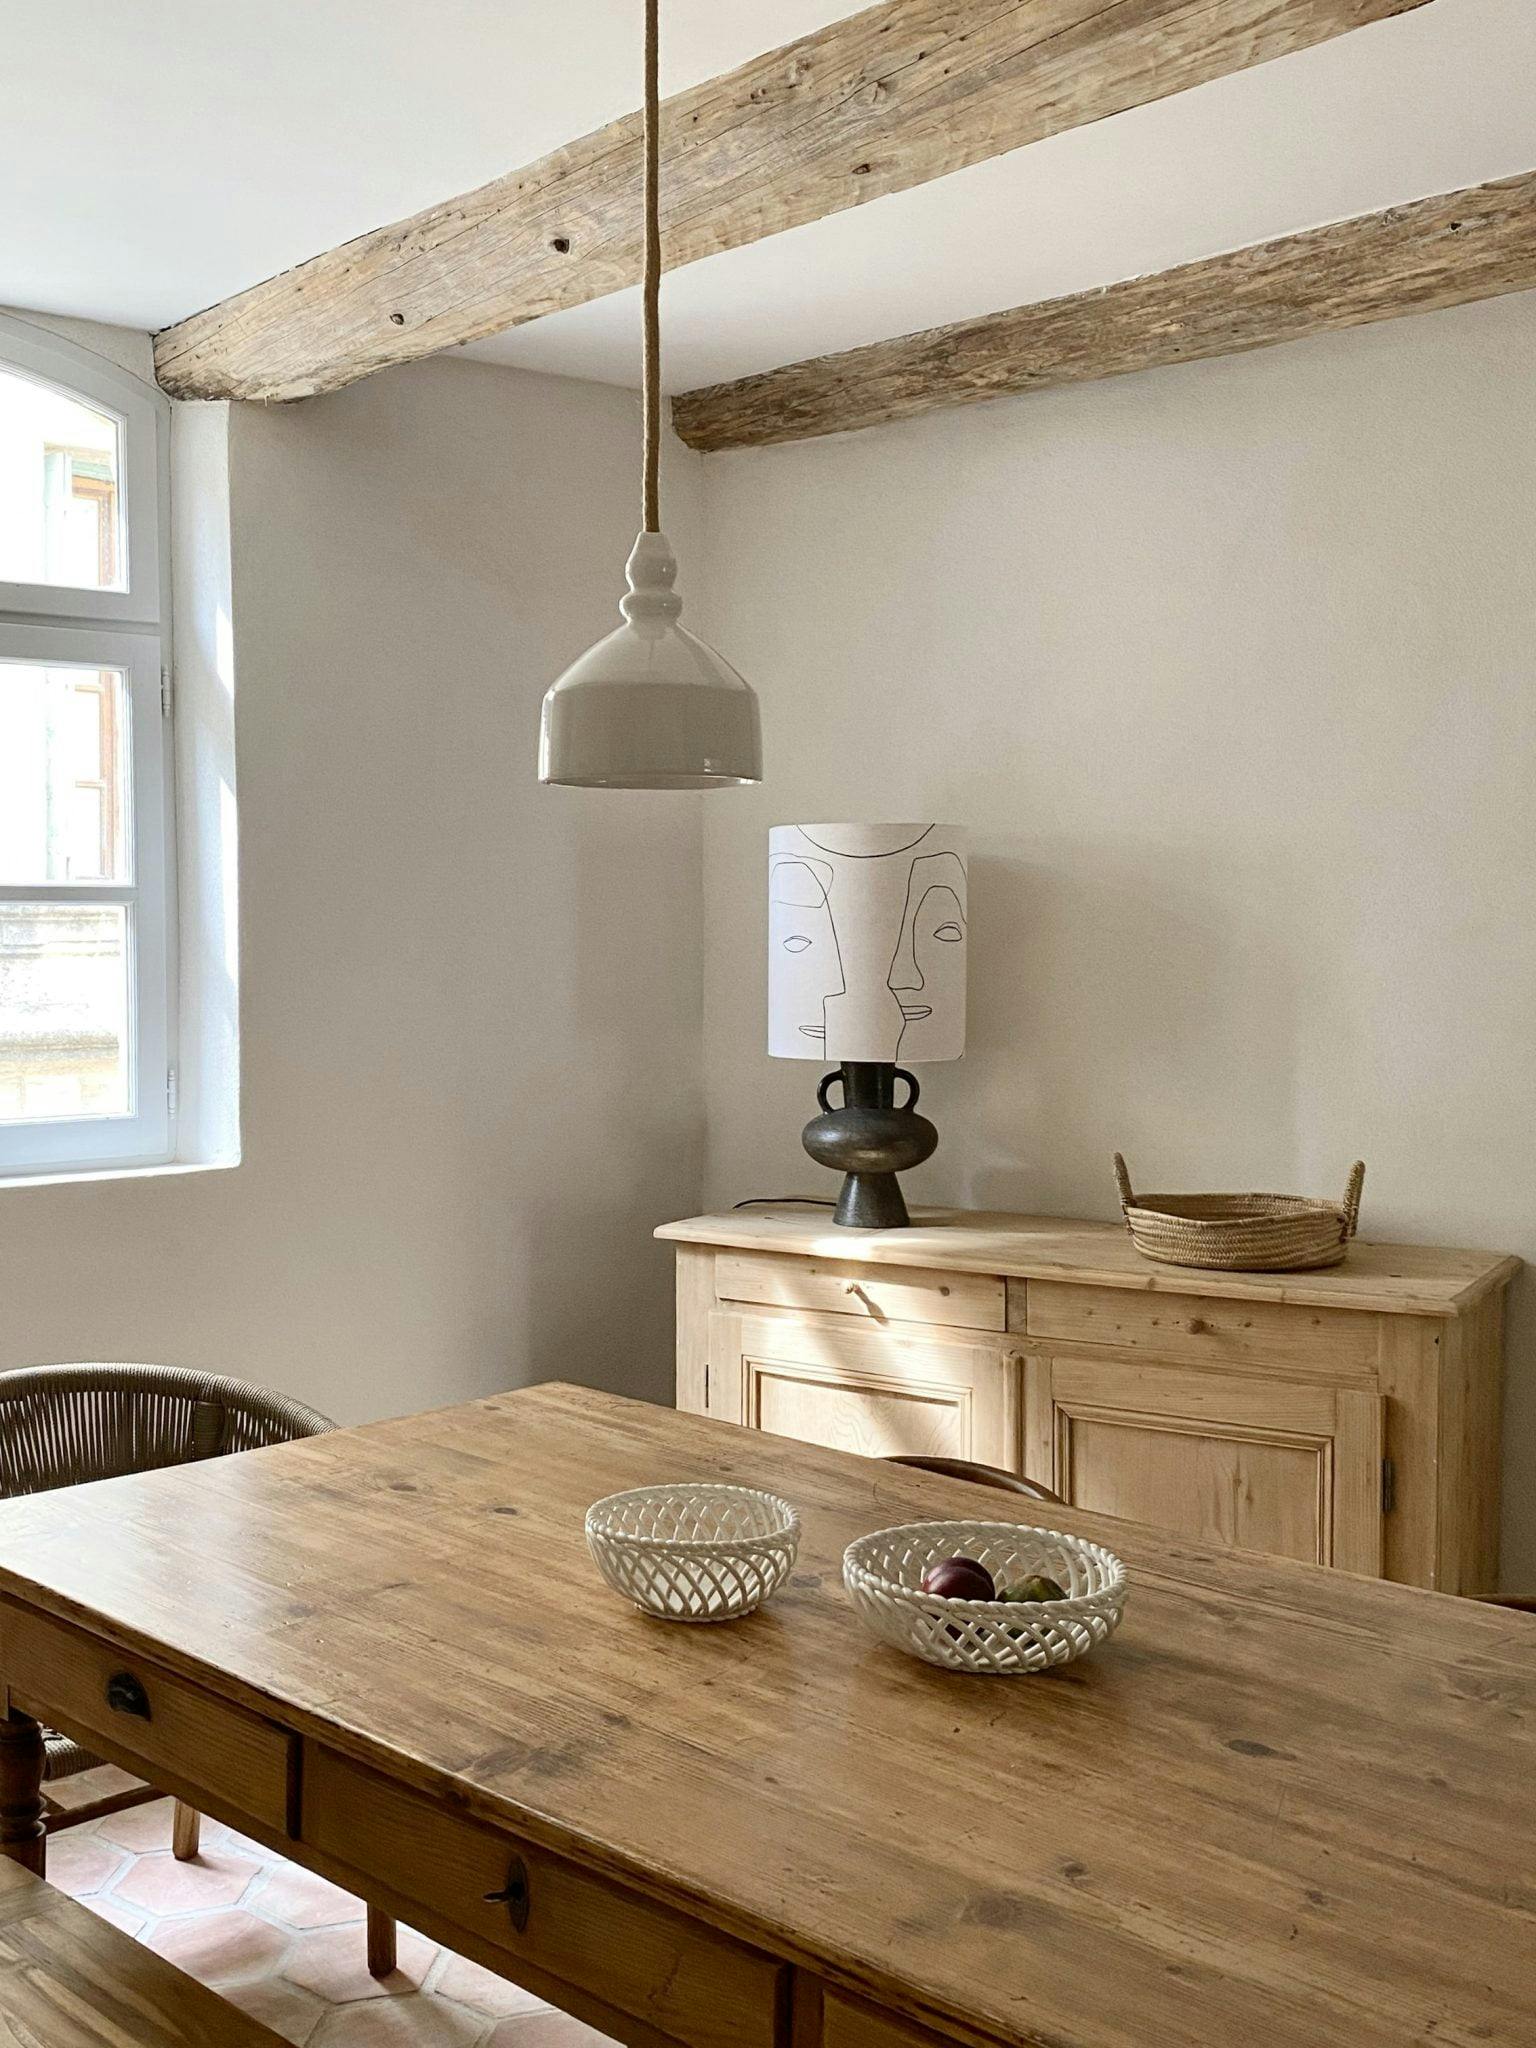 Large farm table in a bright room, sideboard and window